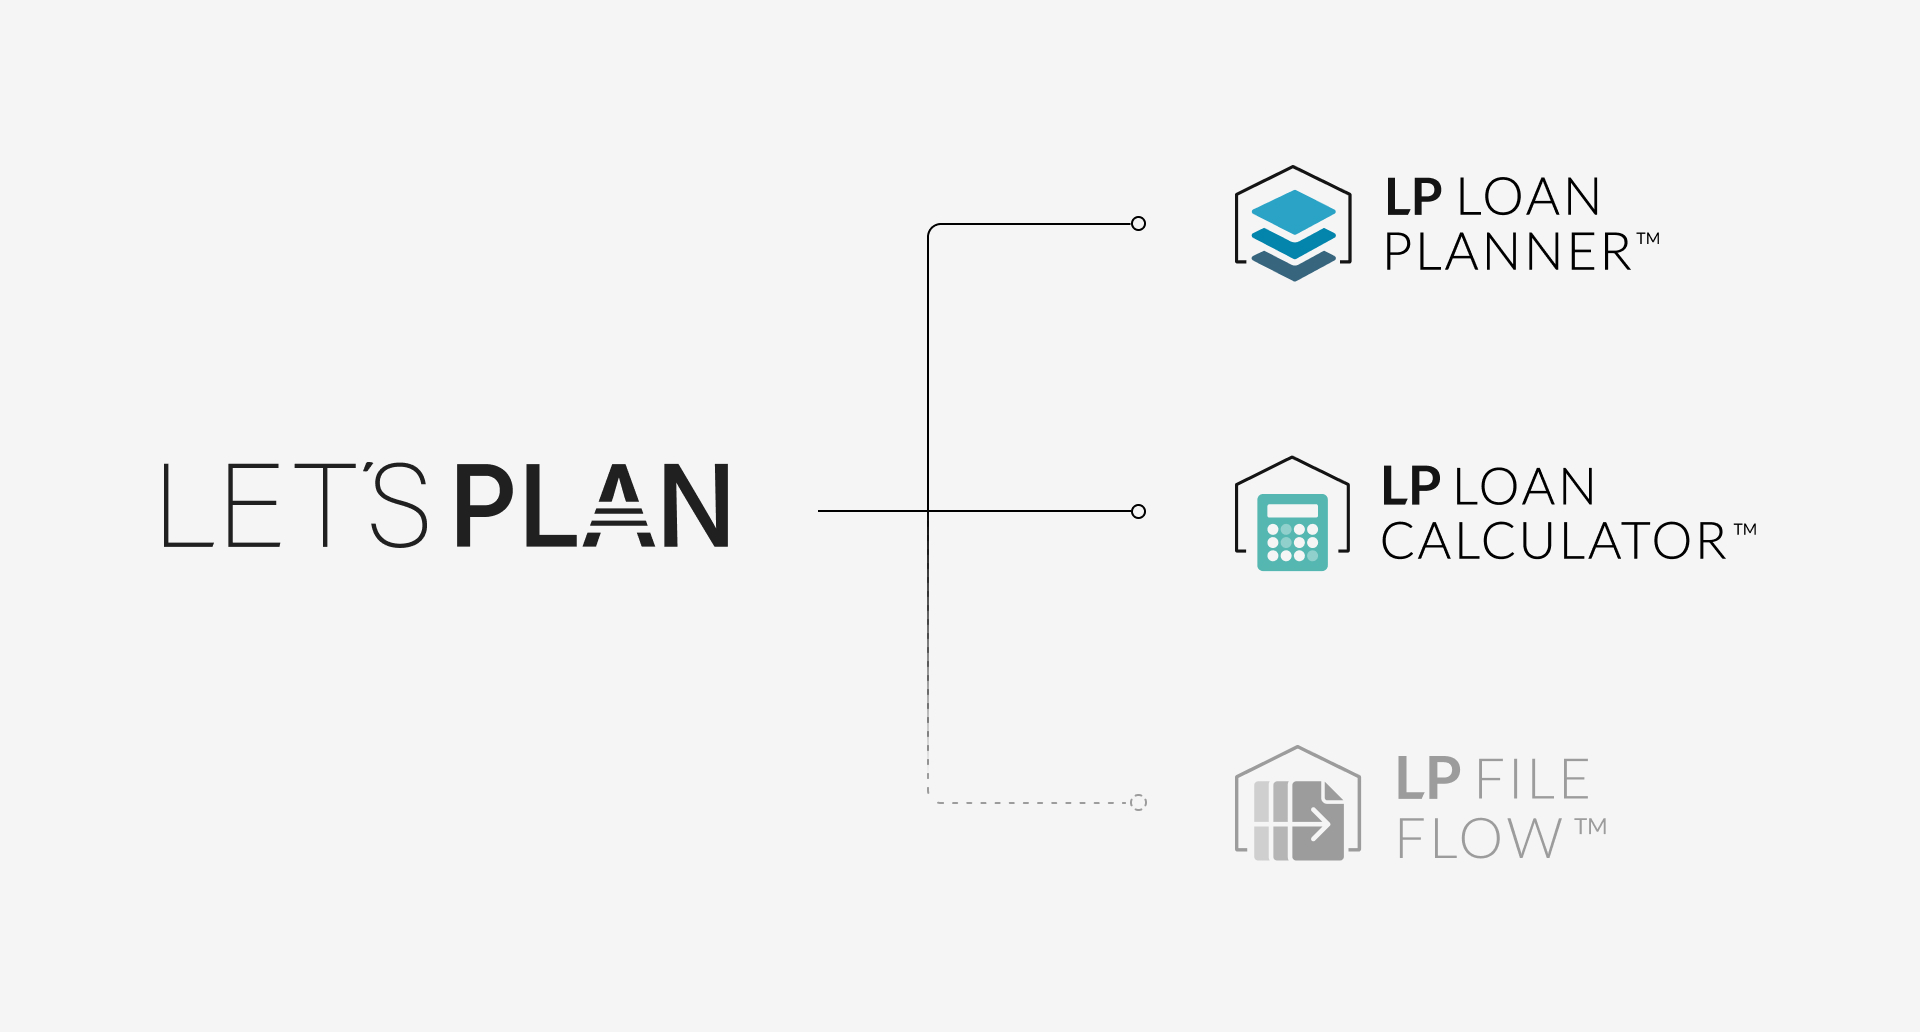 Infographic showing The Let's Plan™ parent company and it's brand entities including LP Loan Planner™, LP Loan Calculator™, and LP File Flow™